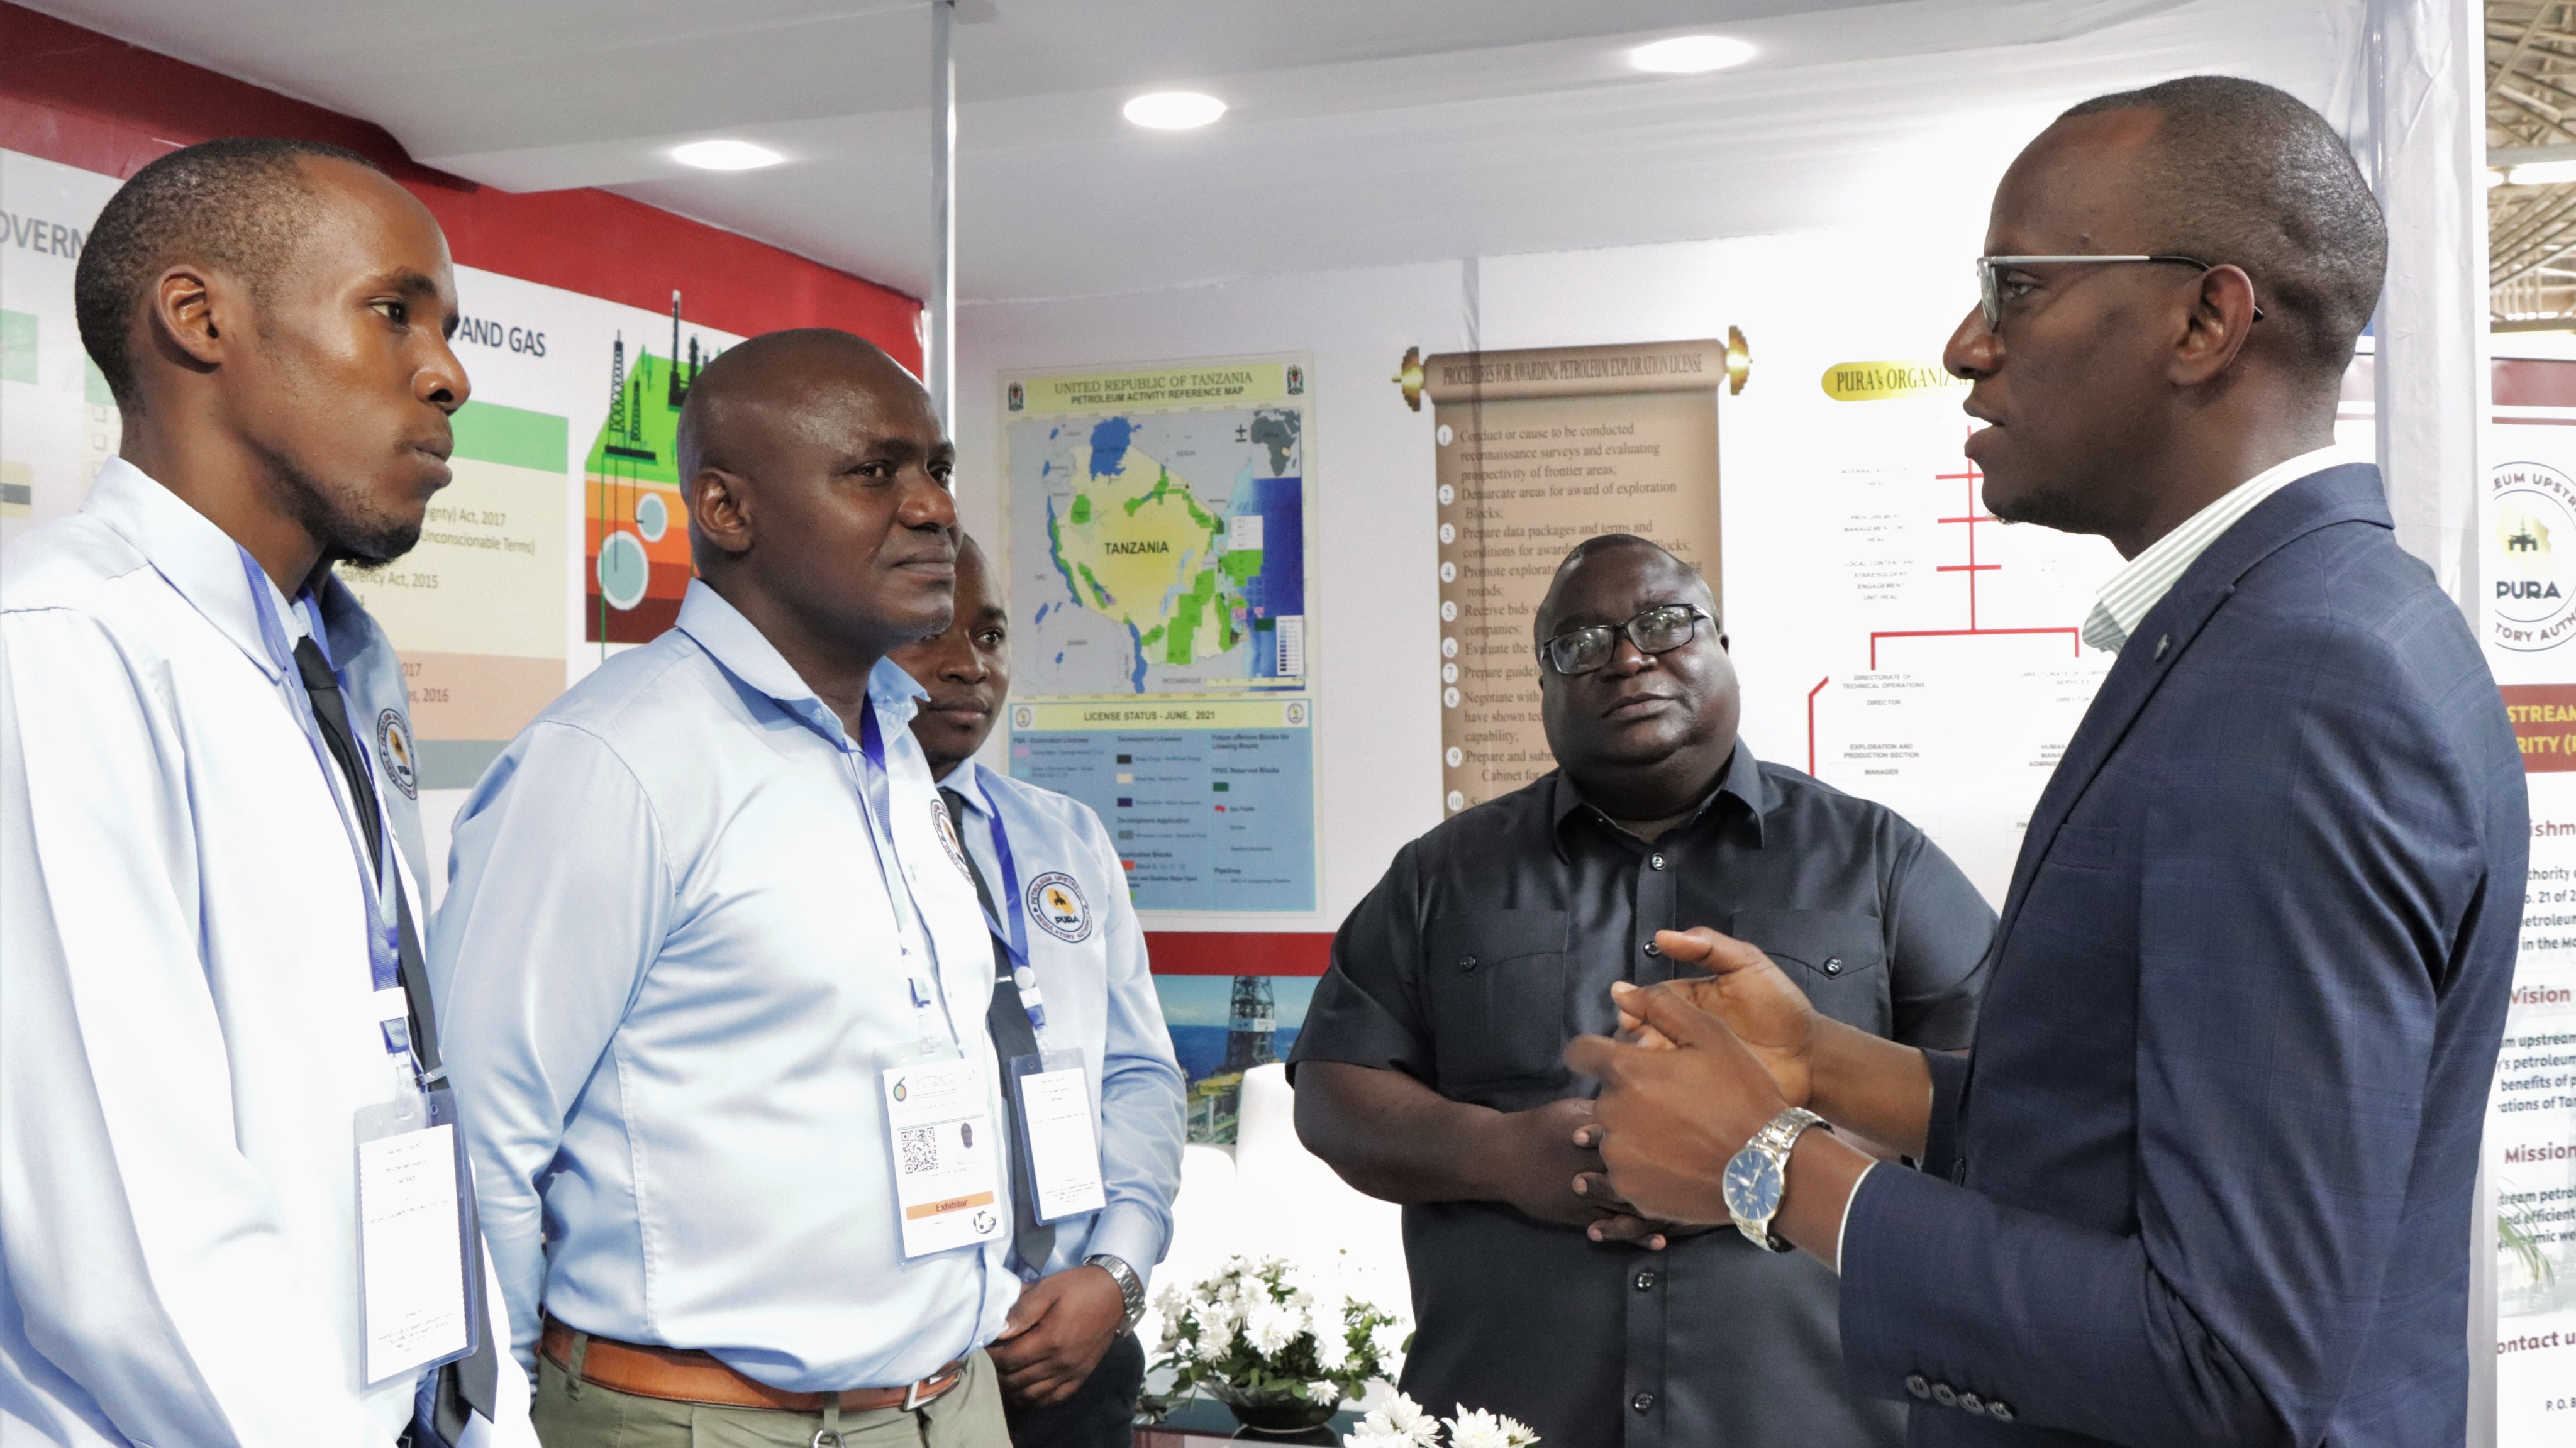 Deputy Minister of Energy Stephen Byabato talking to PURA officials, during his visit to the Authority's pavilion at the 45th International Trade Fair (Sabasaba) 2021 which takes place at Sabasaba grounds.